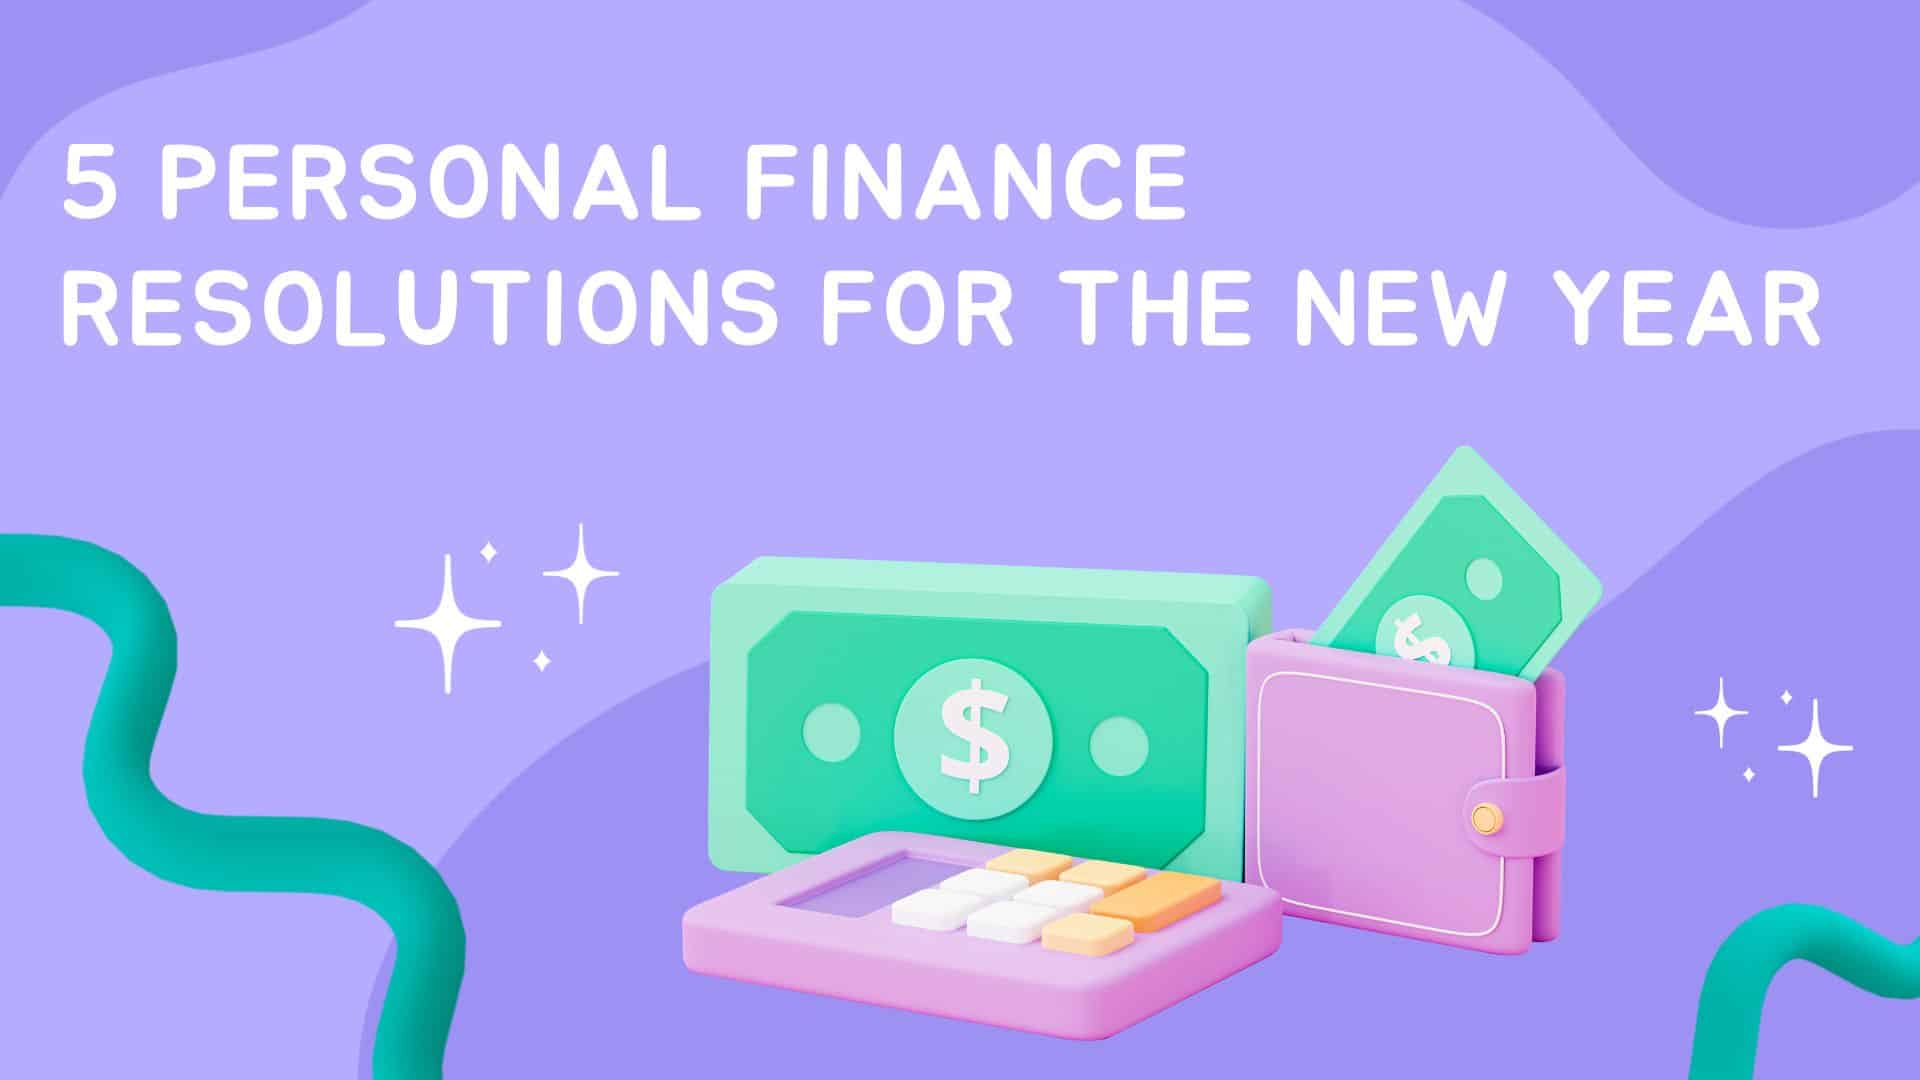 5 Personal Finance Resolutions for the New Year